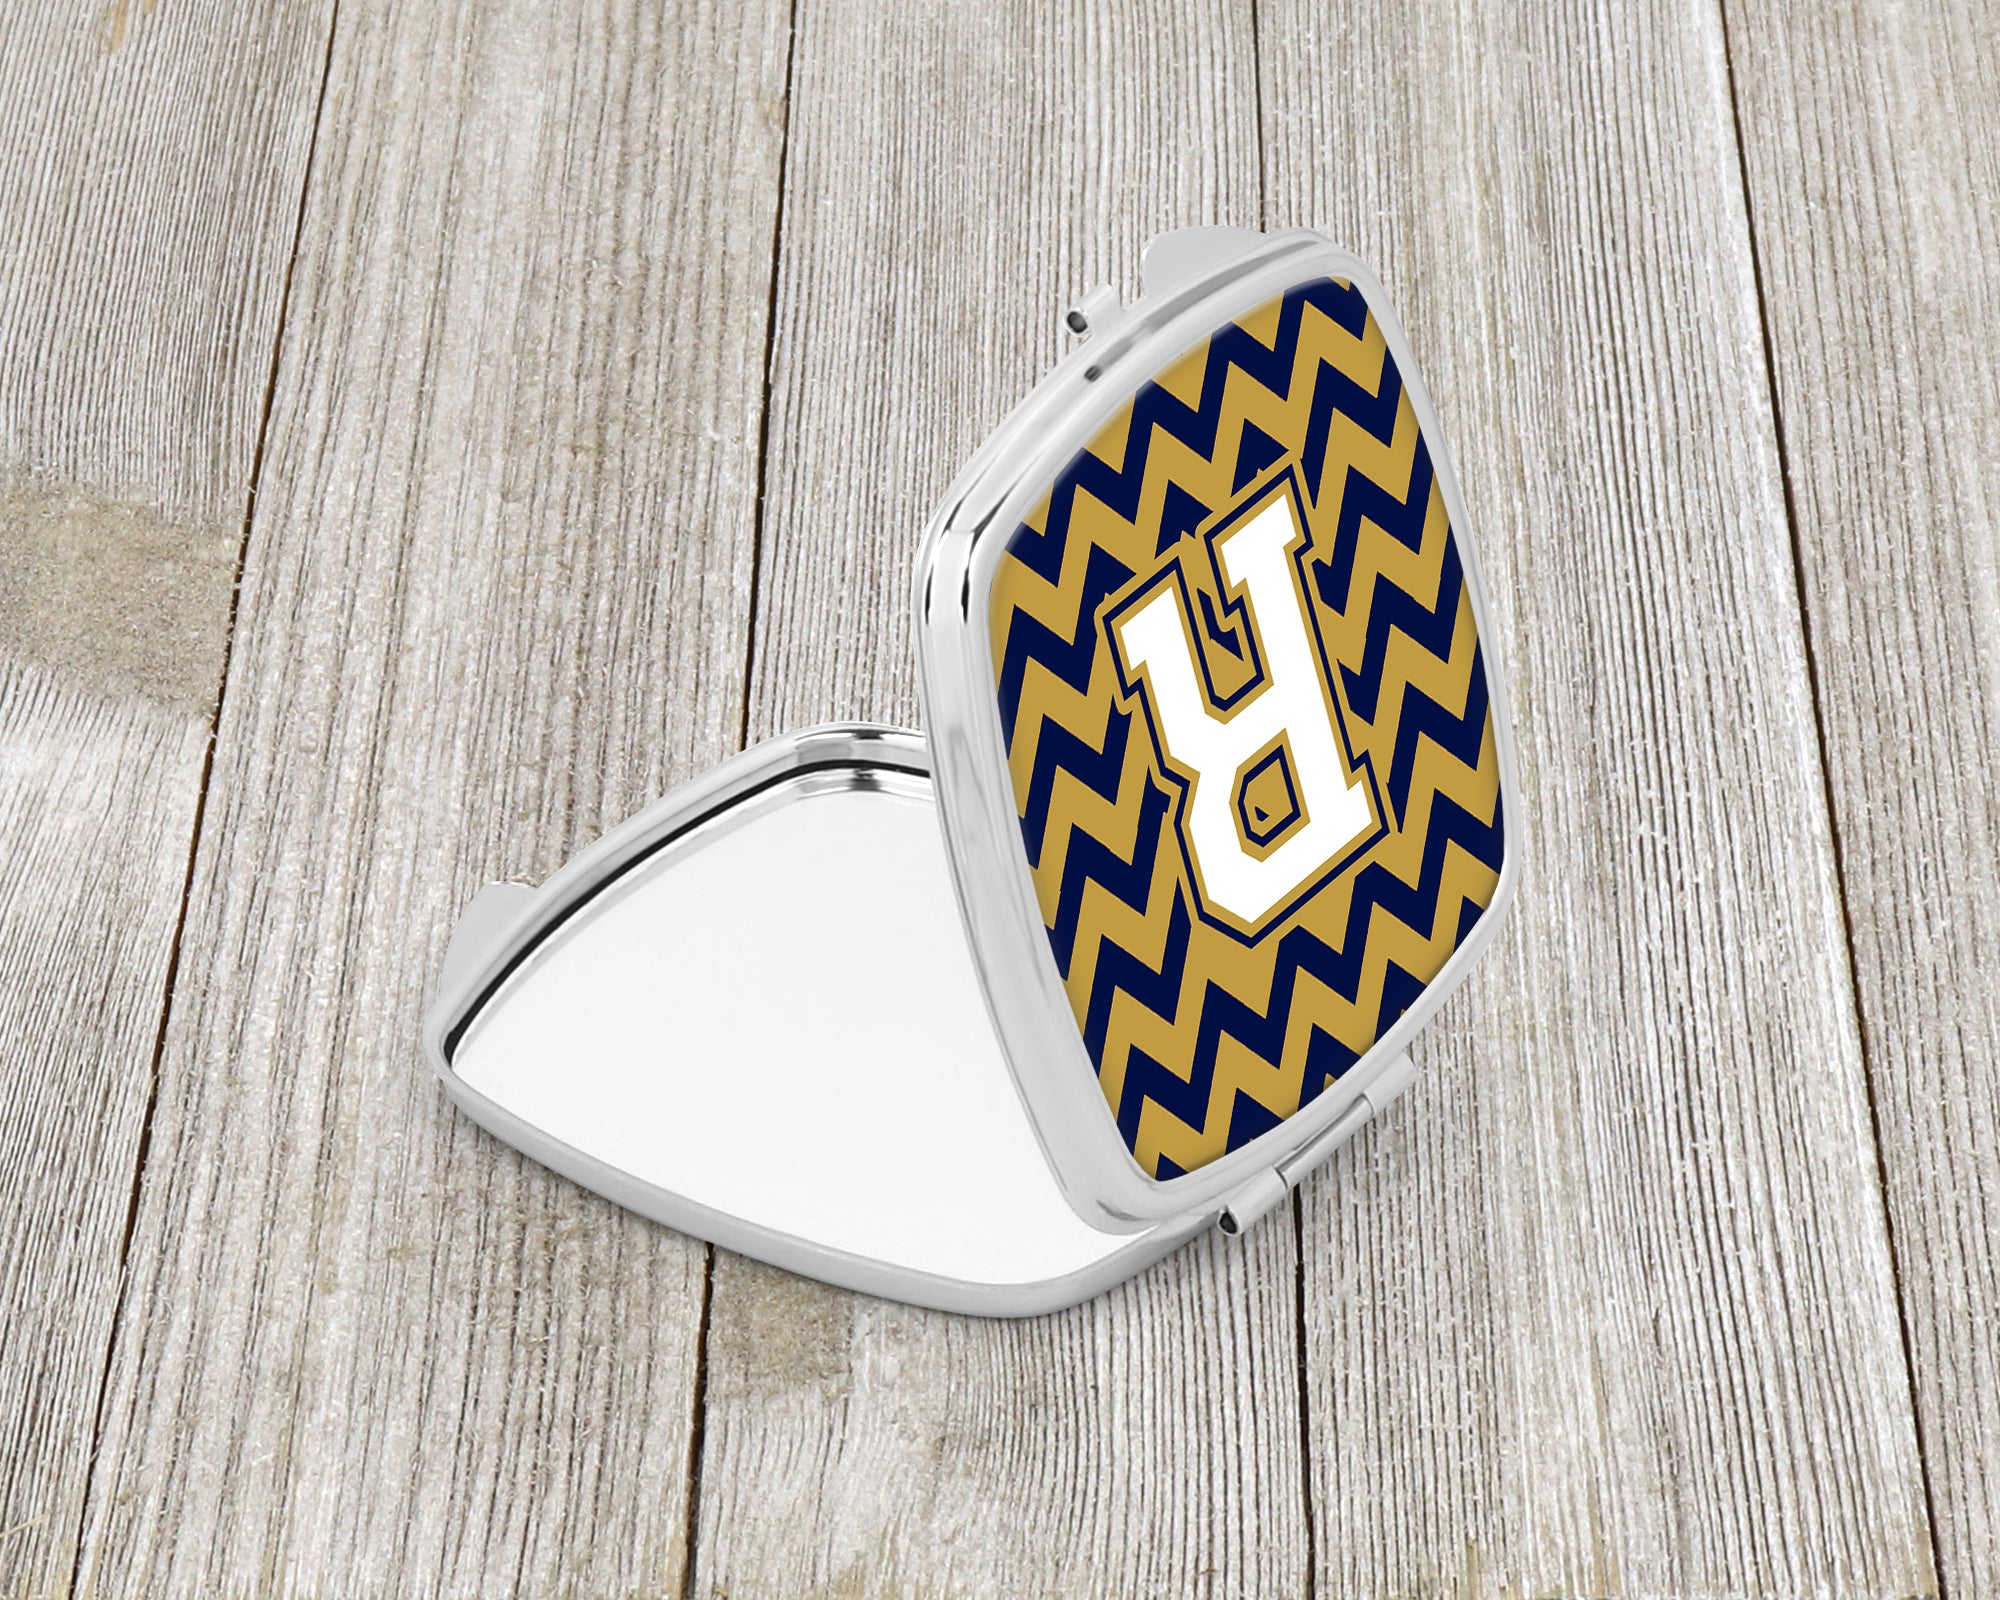 Letter R Chevron Navy Blue and Gold Compact Mirror CJ1057-RSCM